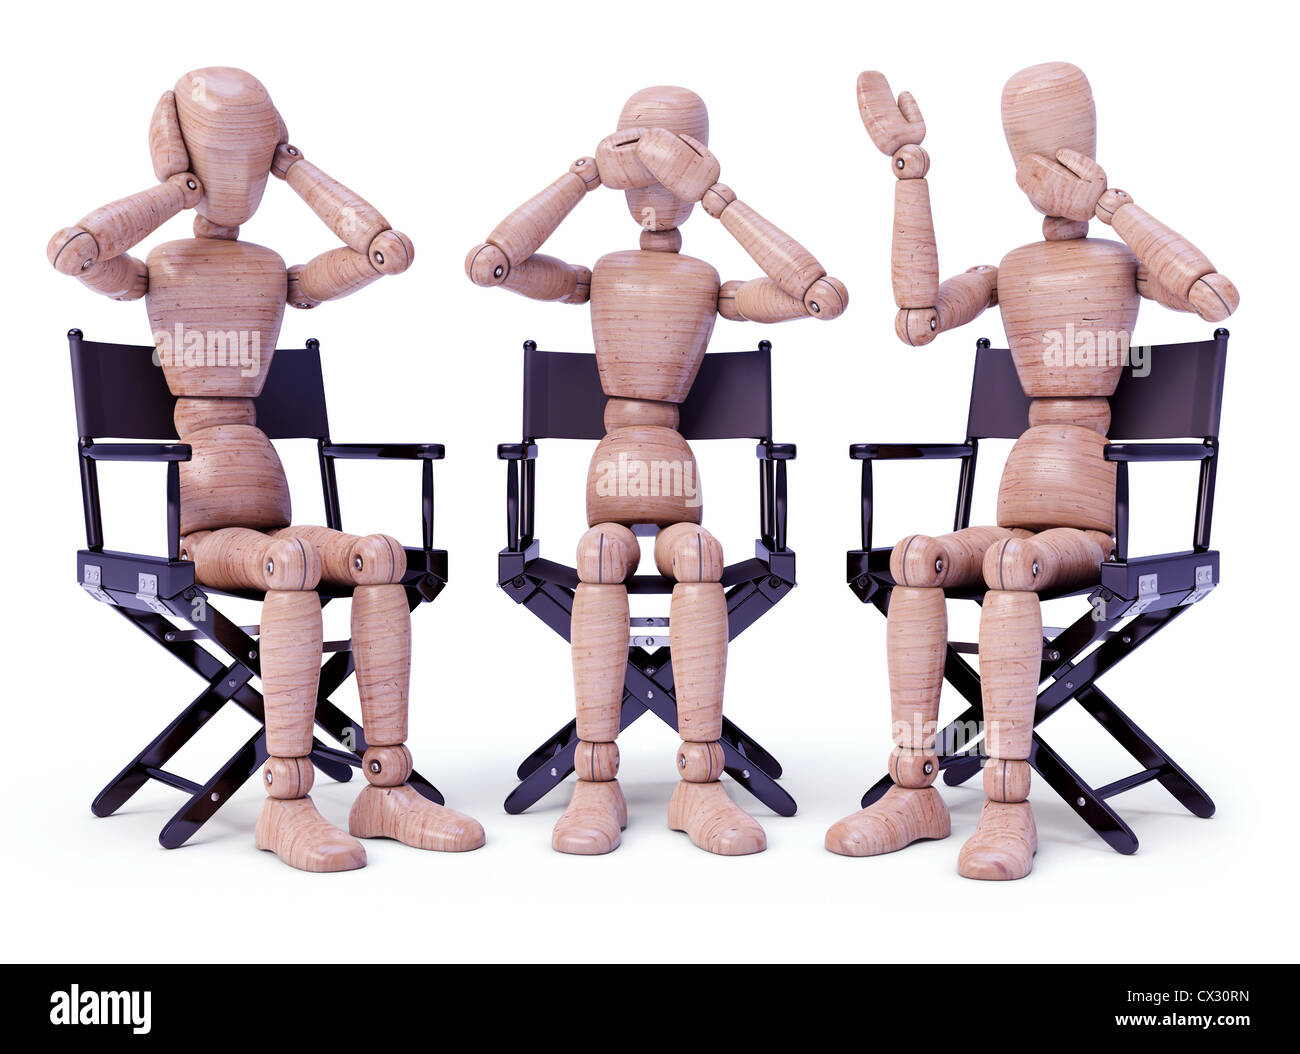 Three wooden dolls sitting doing bodily gestures. Concept of the three wise monkeys. Stock Photo